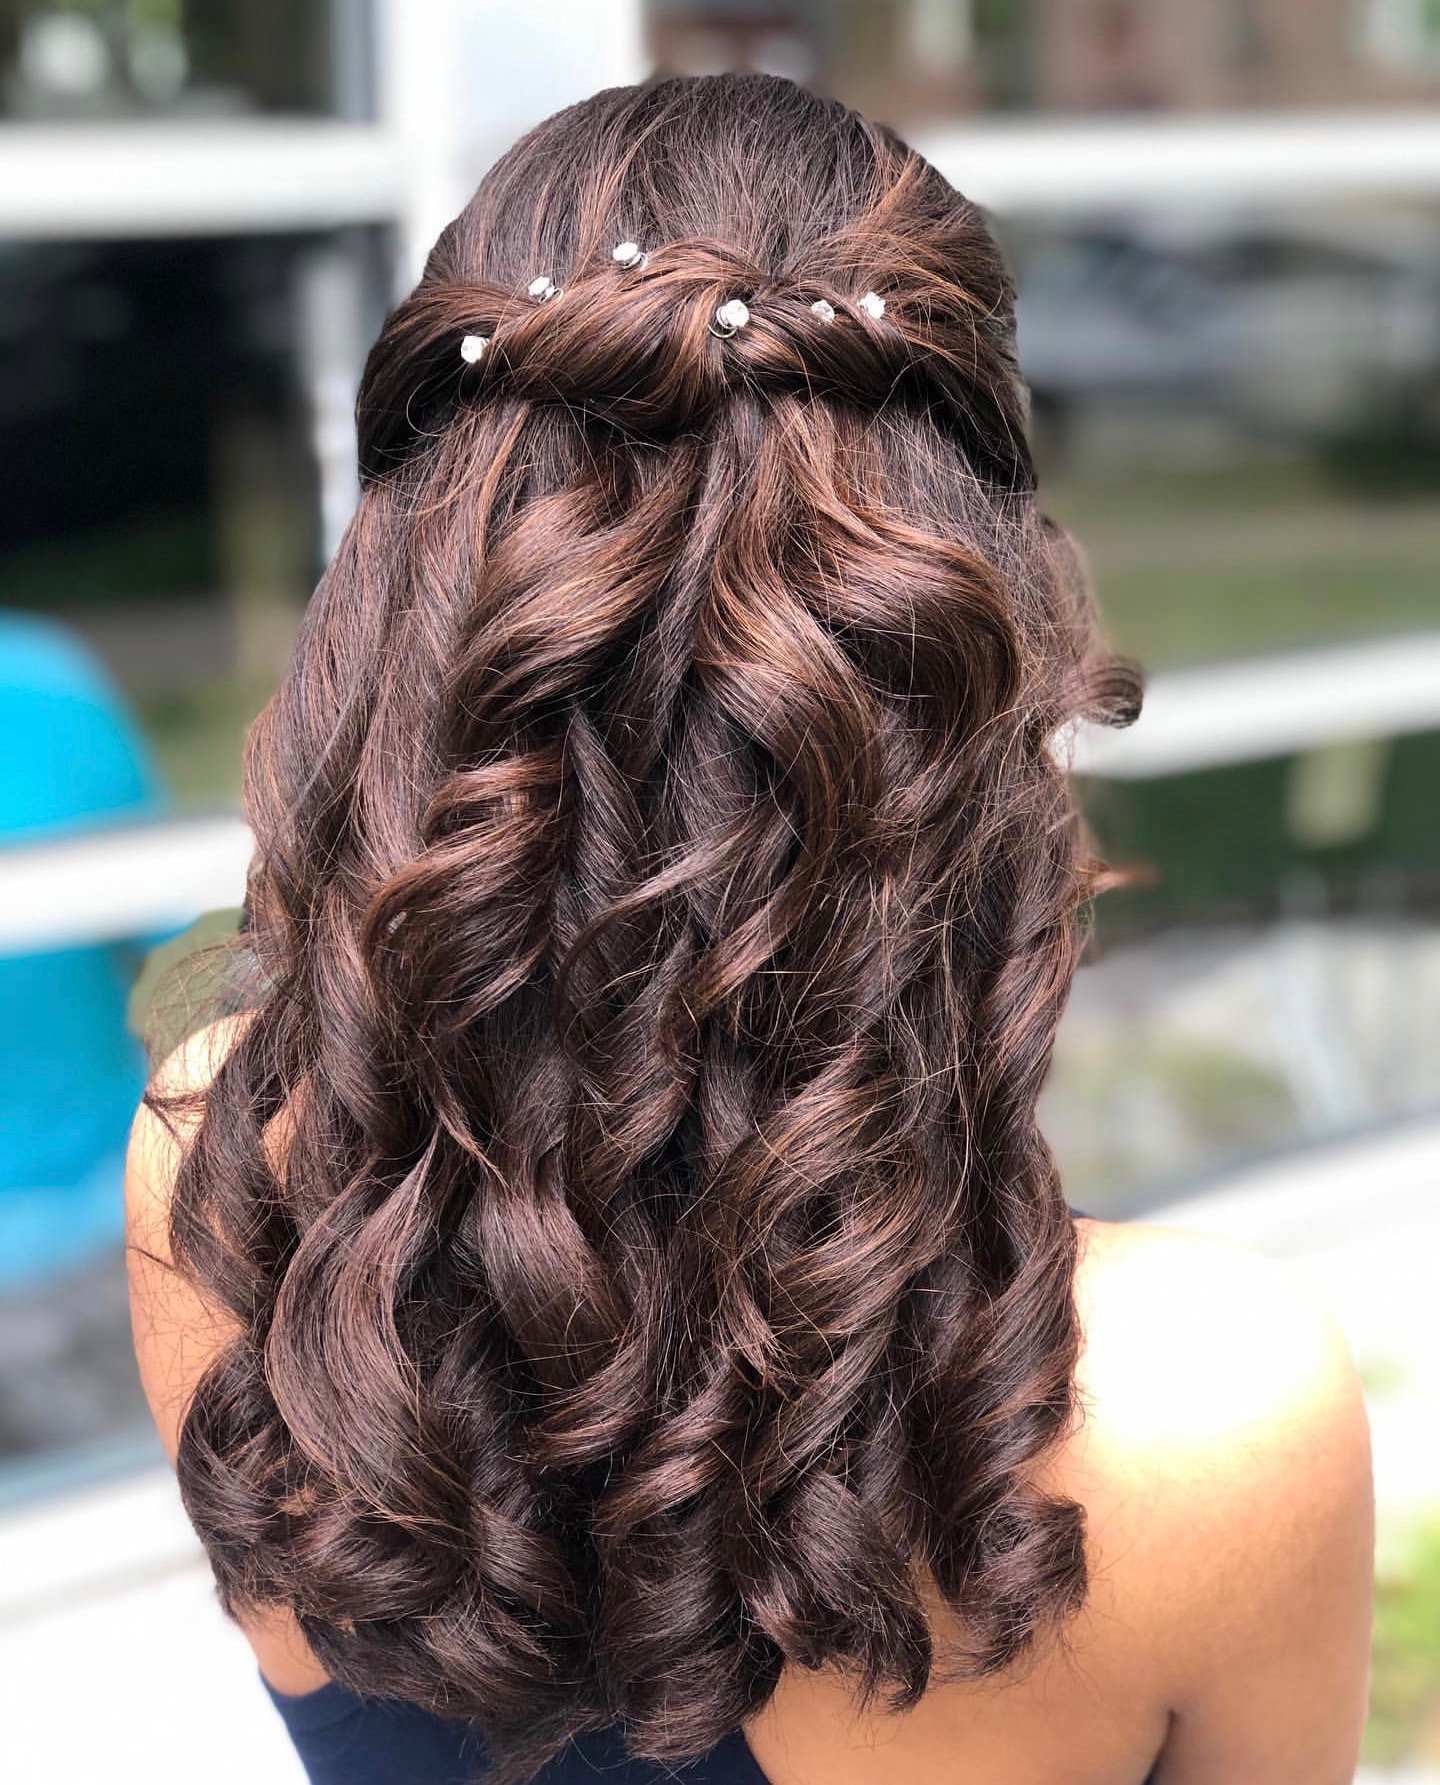 10 Striking Prom Hairstyles to Elevate Your Look – obie6